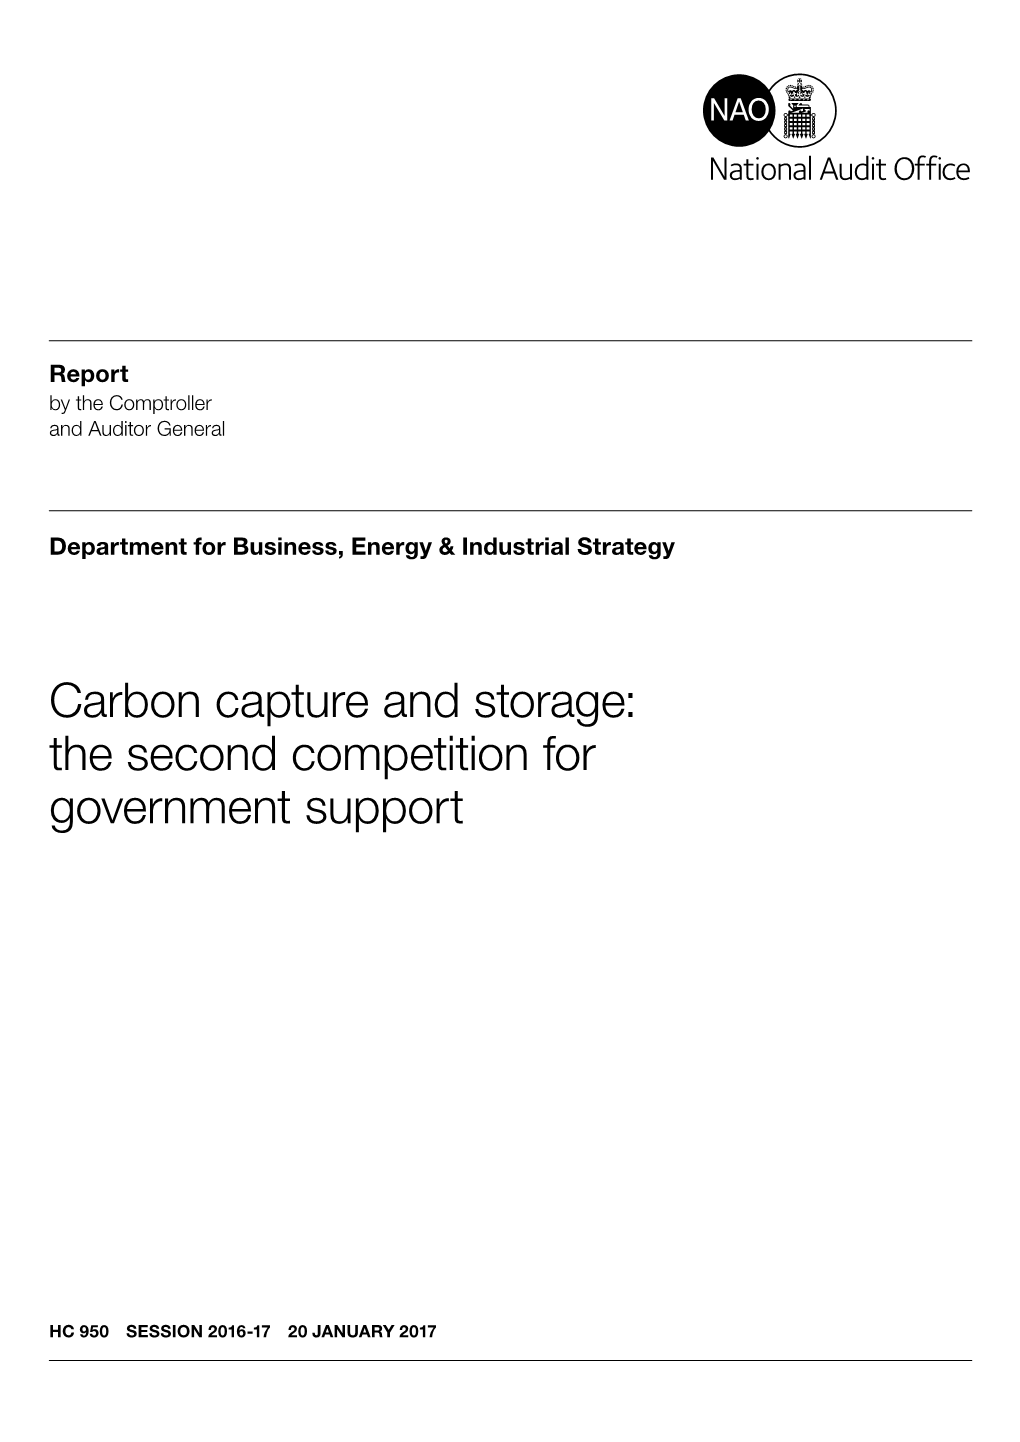 Carbon Capture and Storage the Second Competition for Government DocsLib